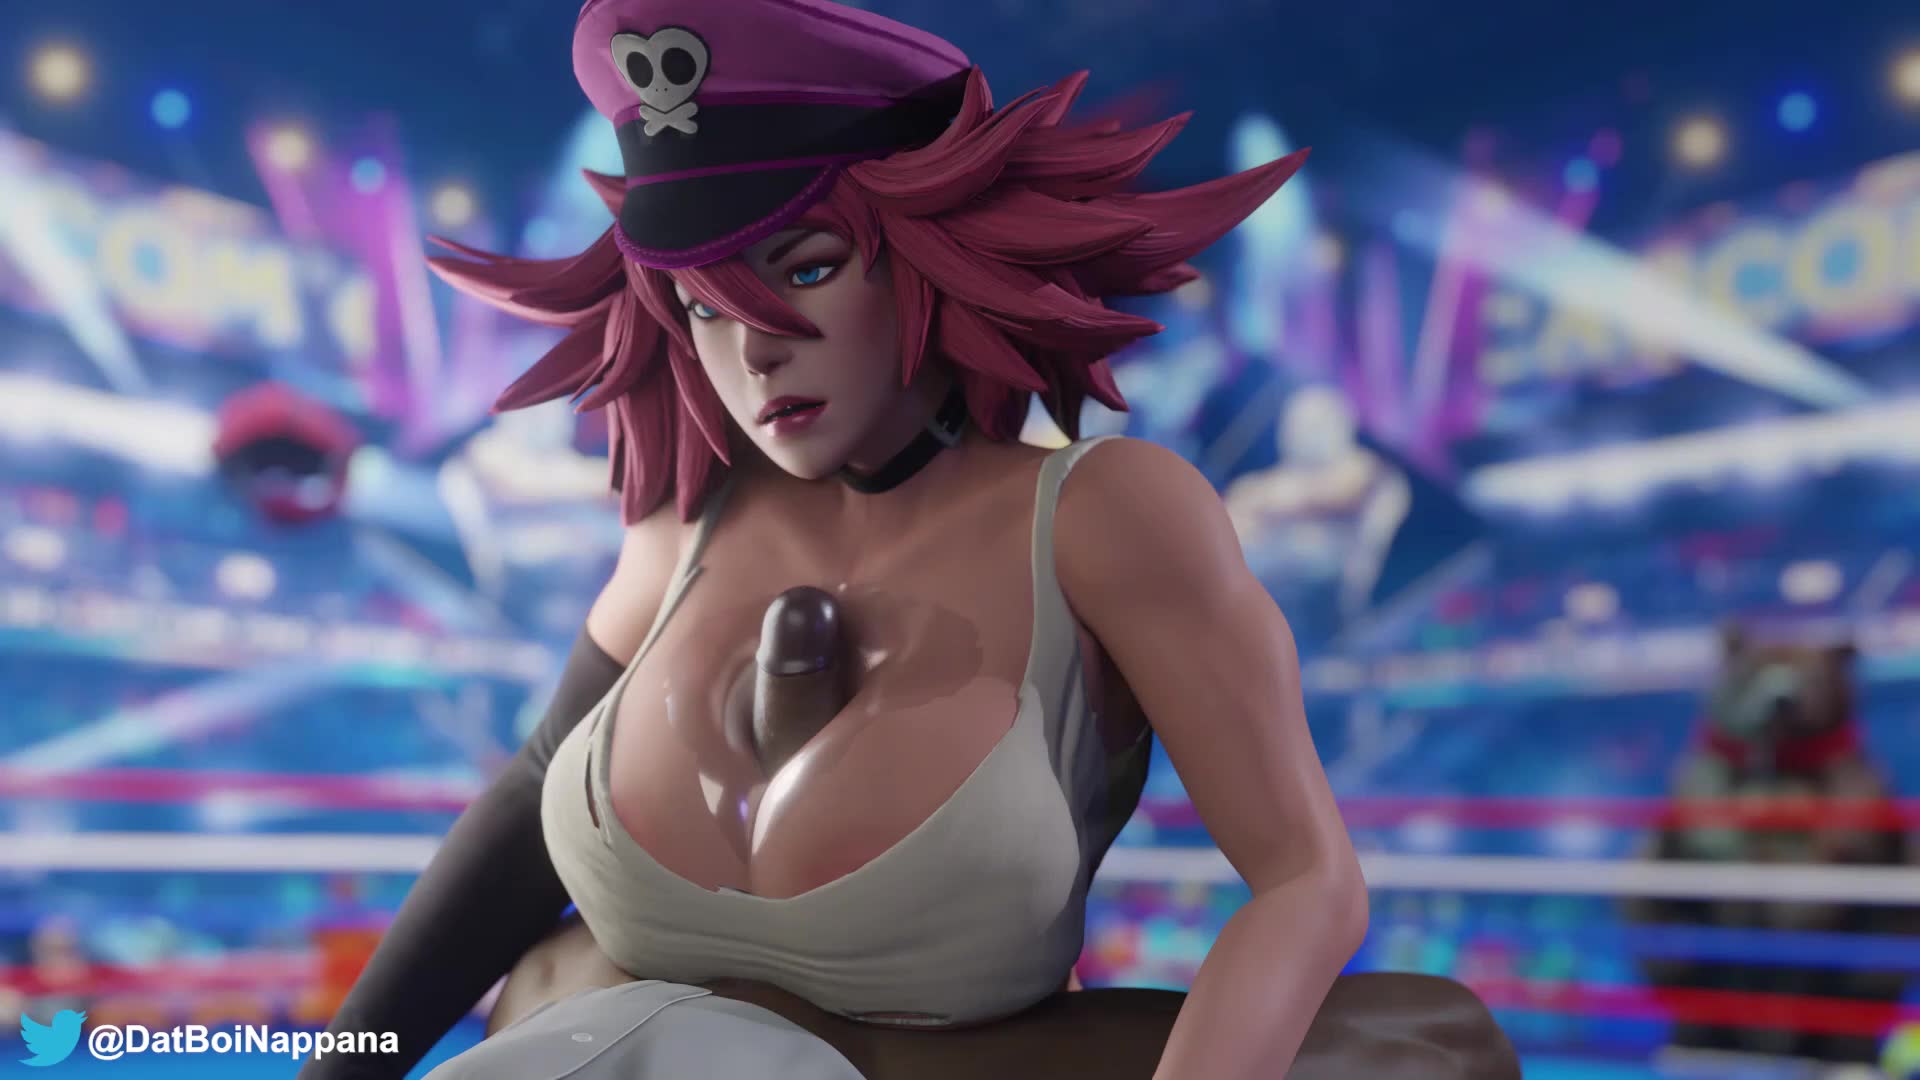 Poison Gives Boobjob To Huge Black Cock – Street Fighter NSFW animation thumbnail